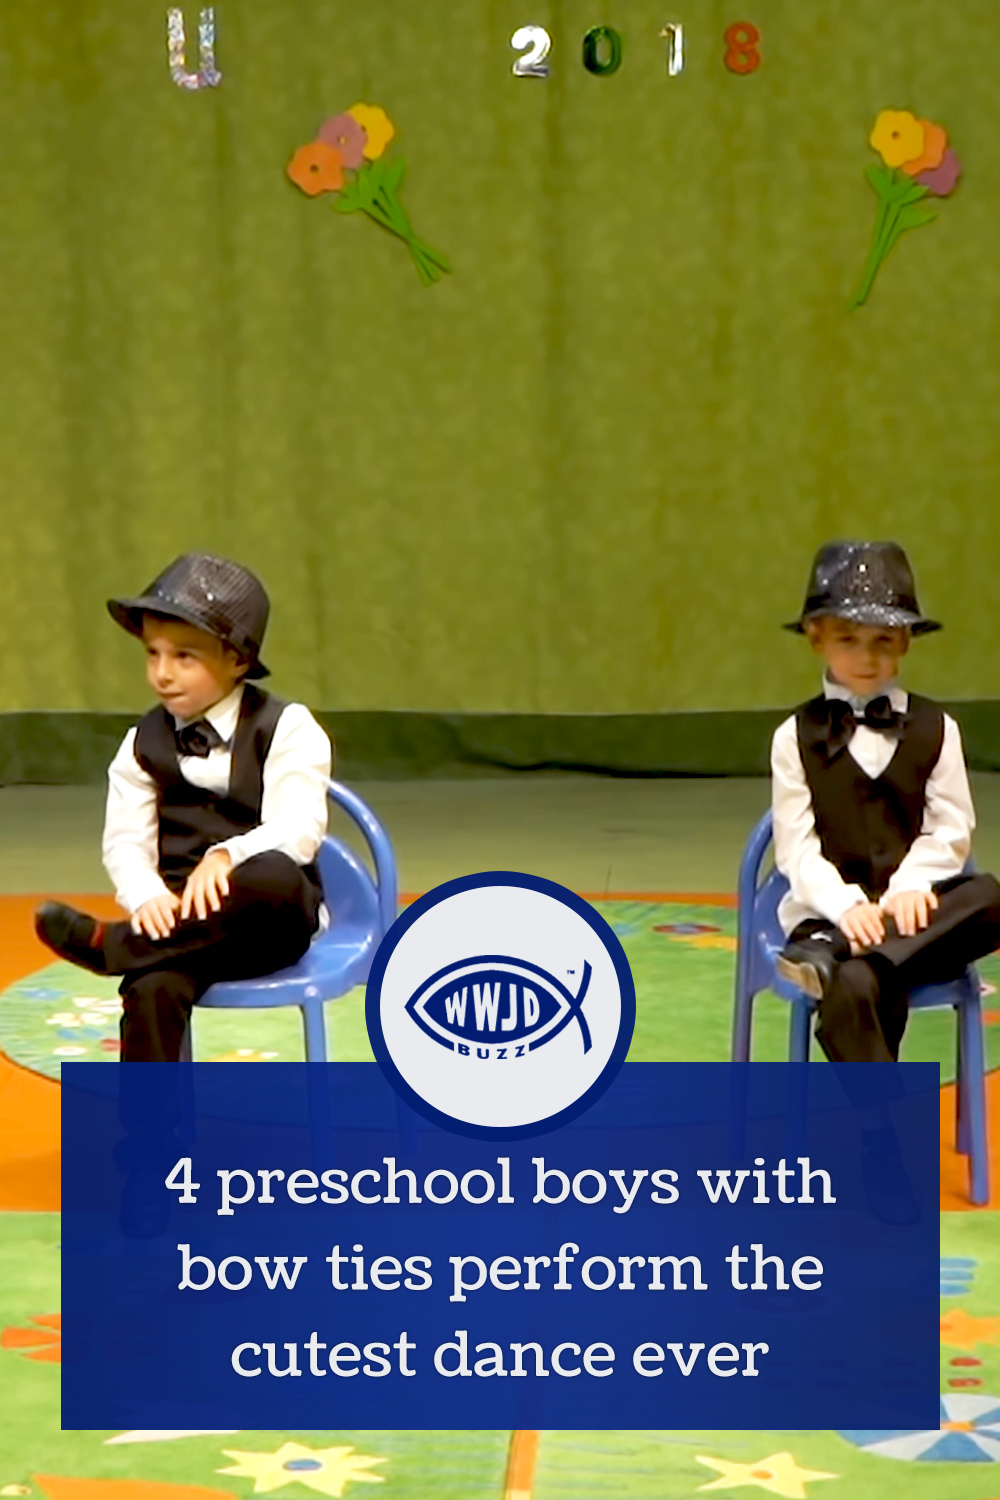 4 preschool boys with bow ties perform the cutest dance ever